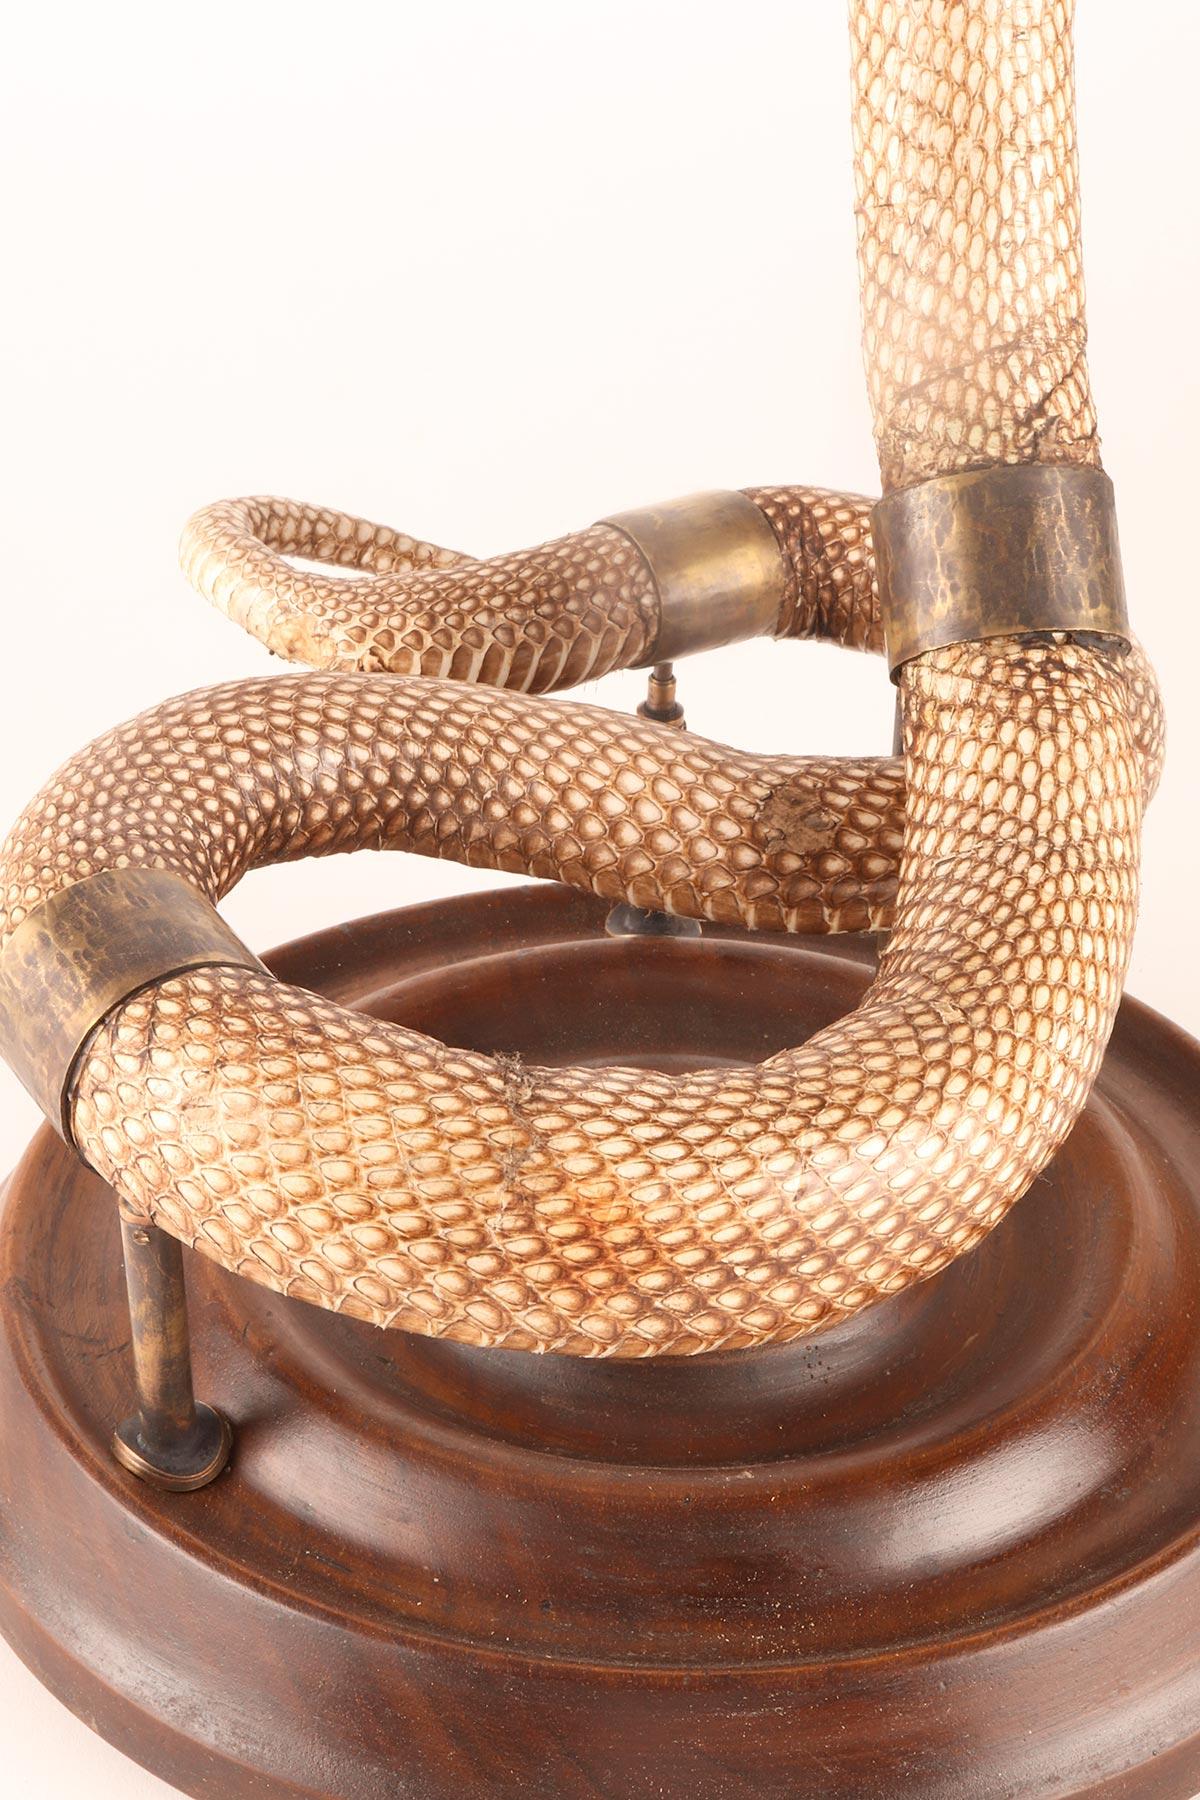 A specimen of Hemachatus hemachatus snake taxidermy, Italy 1890. For Sale 5